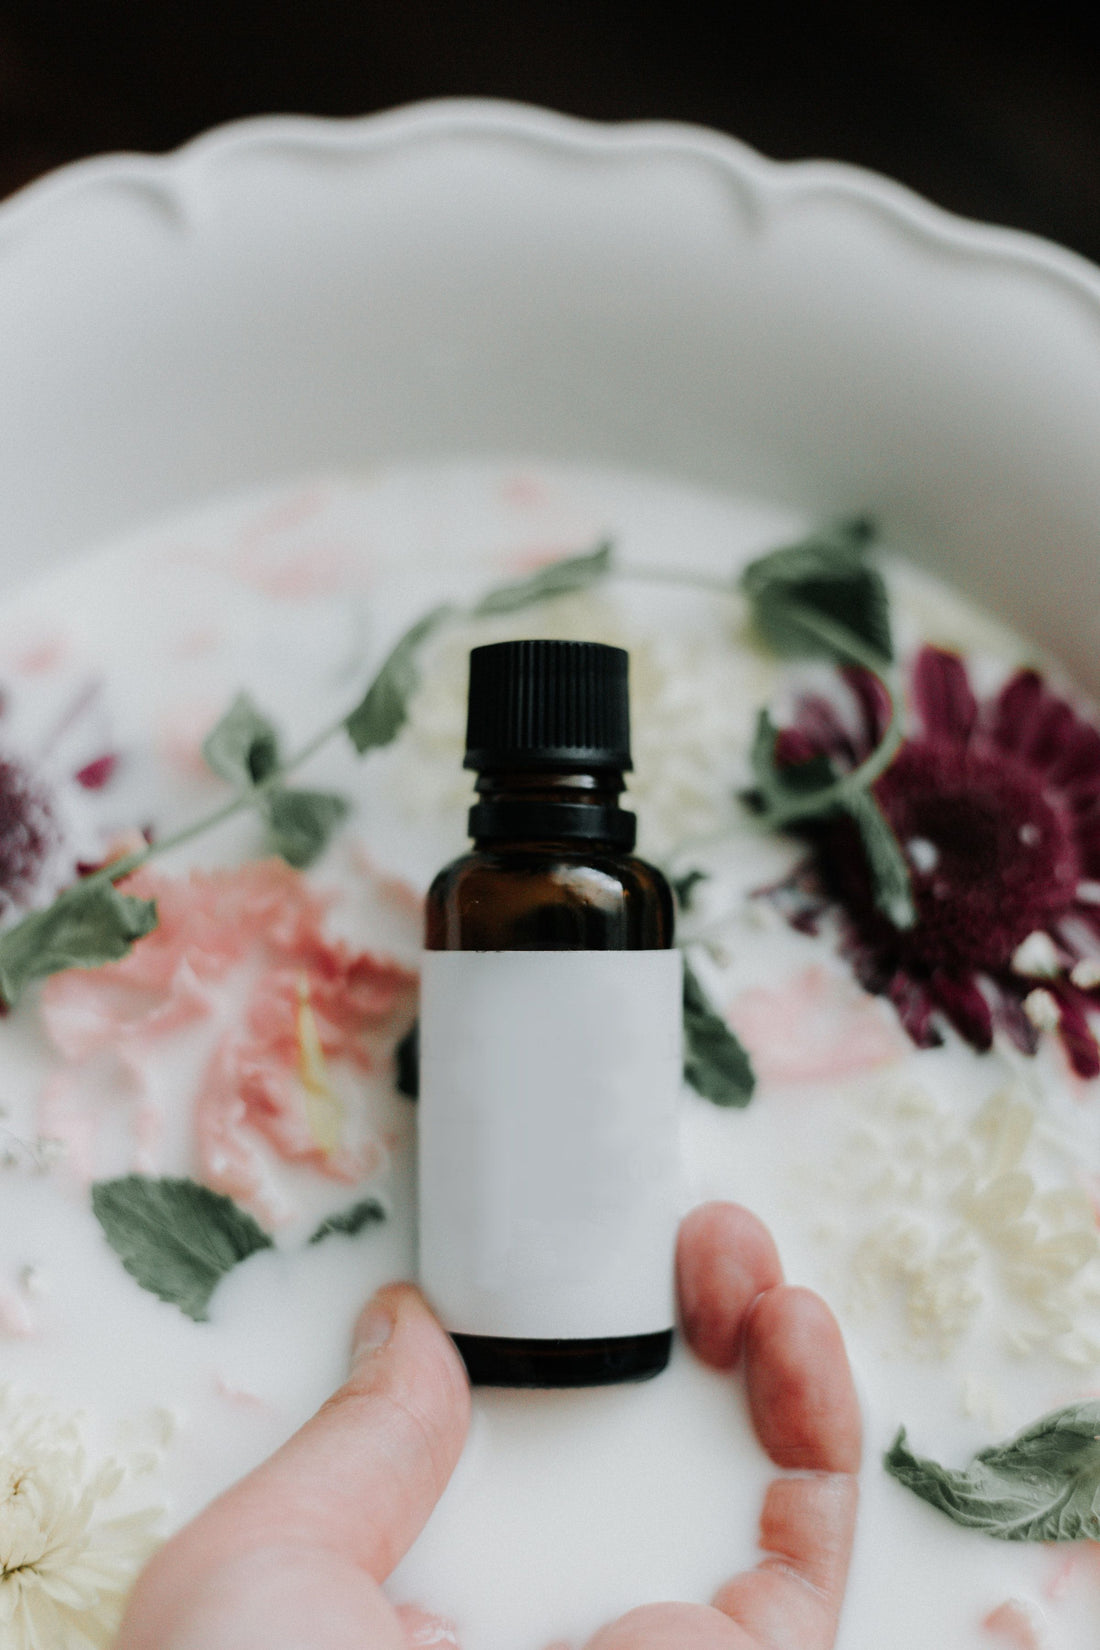 Aromatherapy: New Age Fad Or Ancient Wisdom?